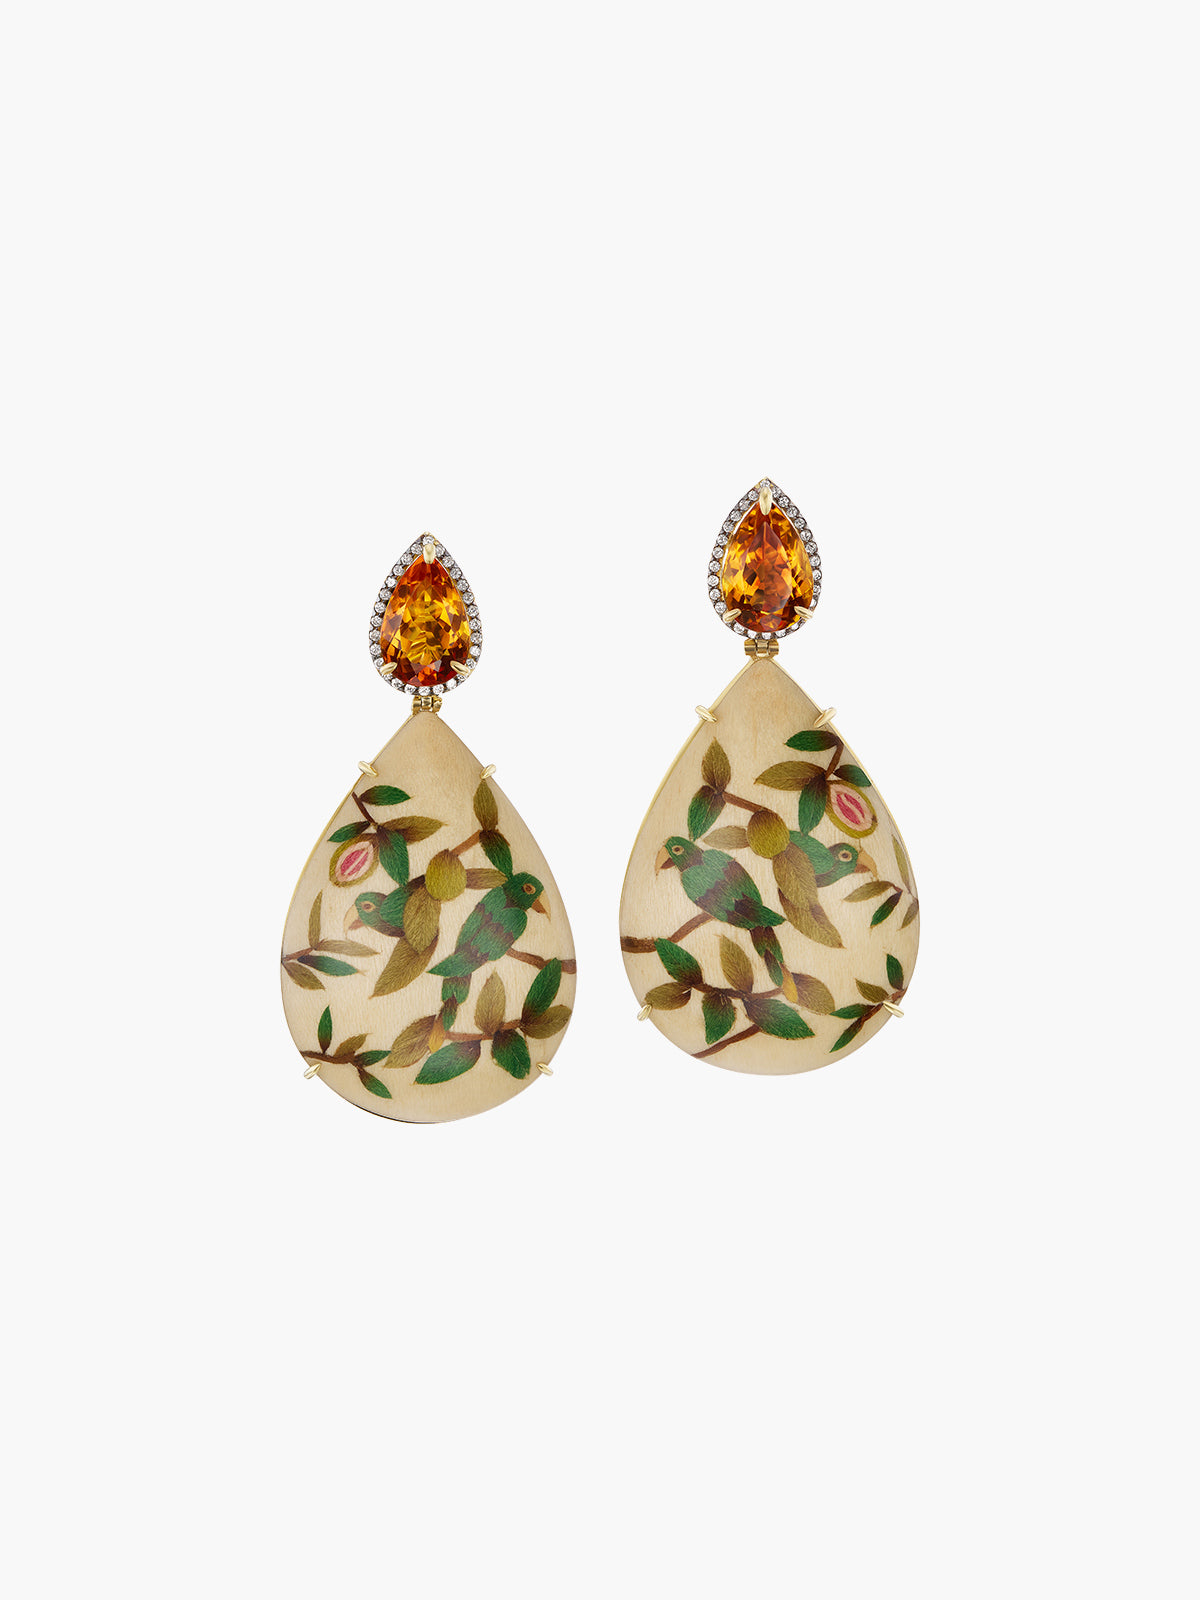 Teardrop Marquetry Earrings | Guava and Parrot on Cream with Citrine & Diamonds Teardrop Marquetry Earrings | Guava and Parrot on Cream with Citrine & Diamonds